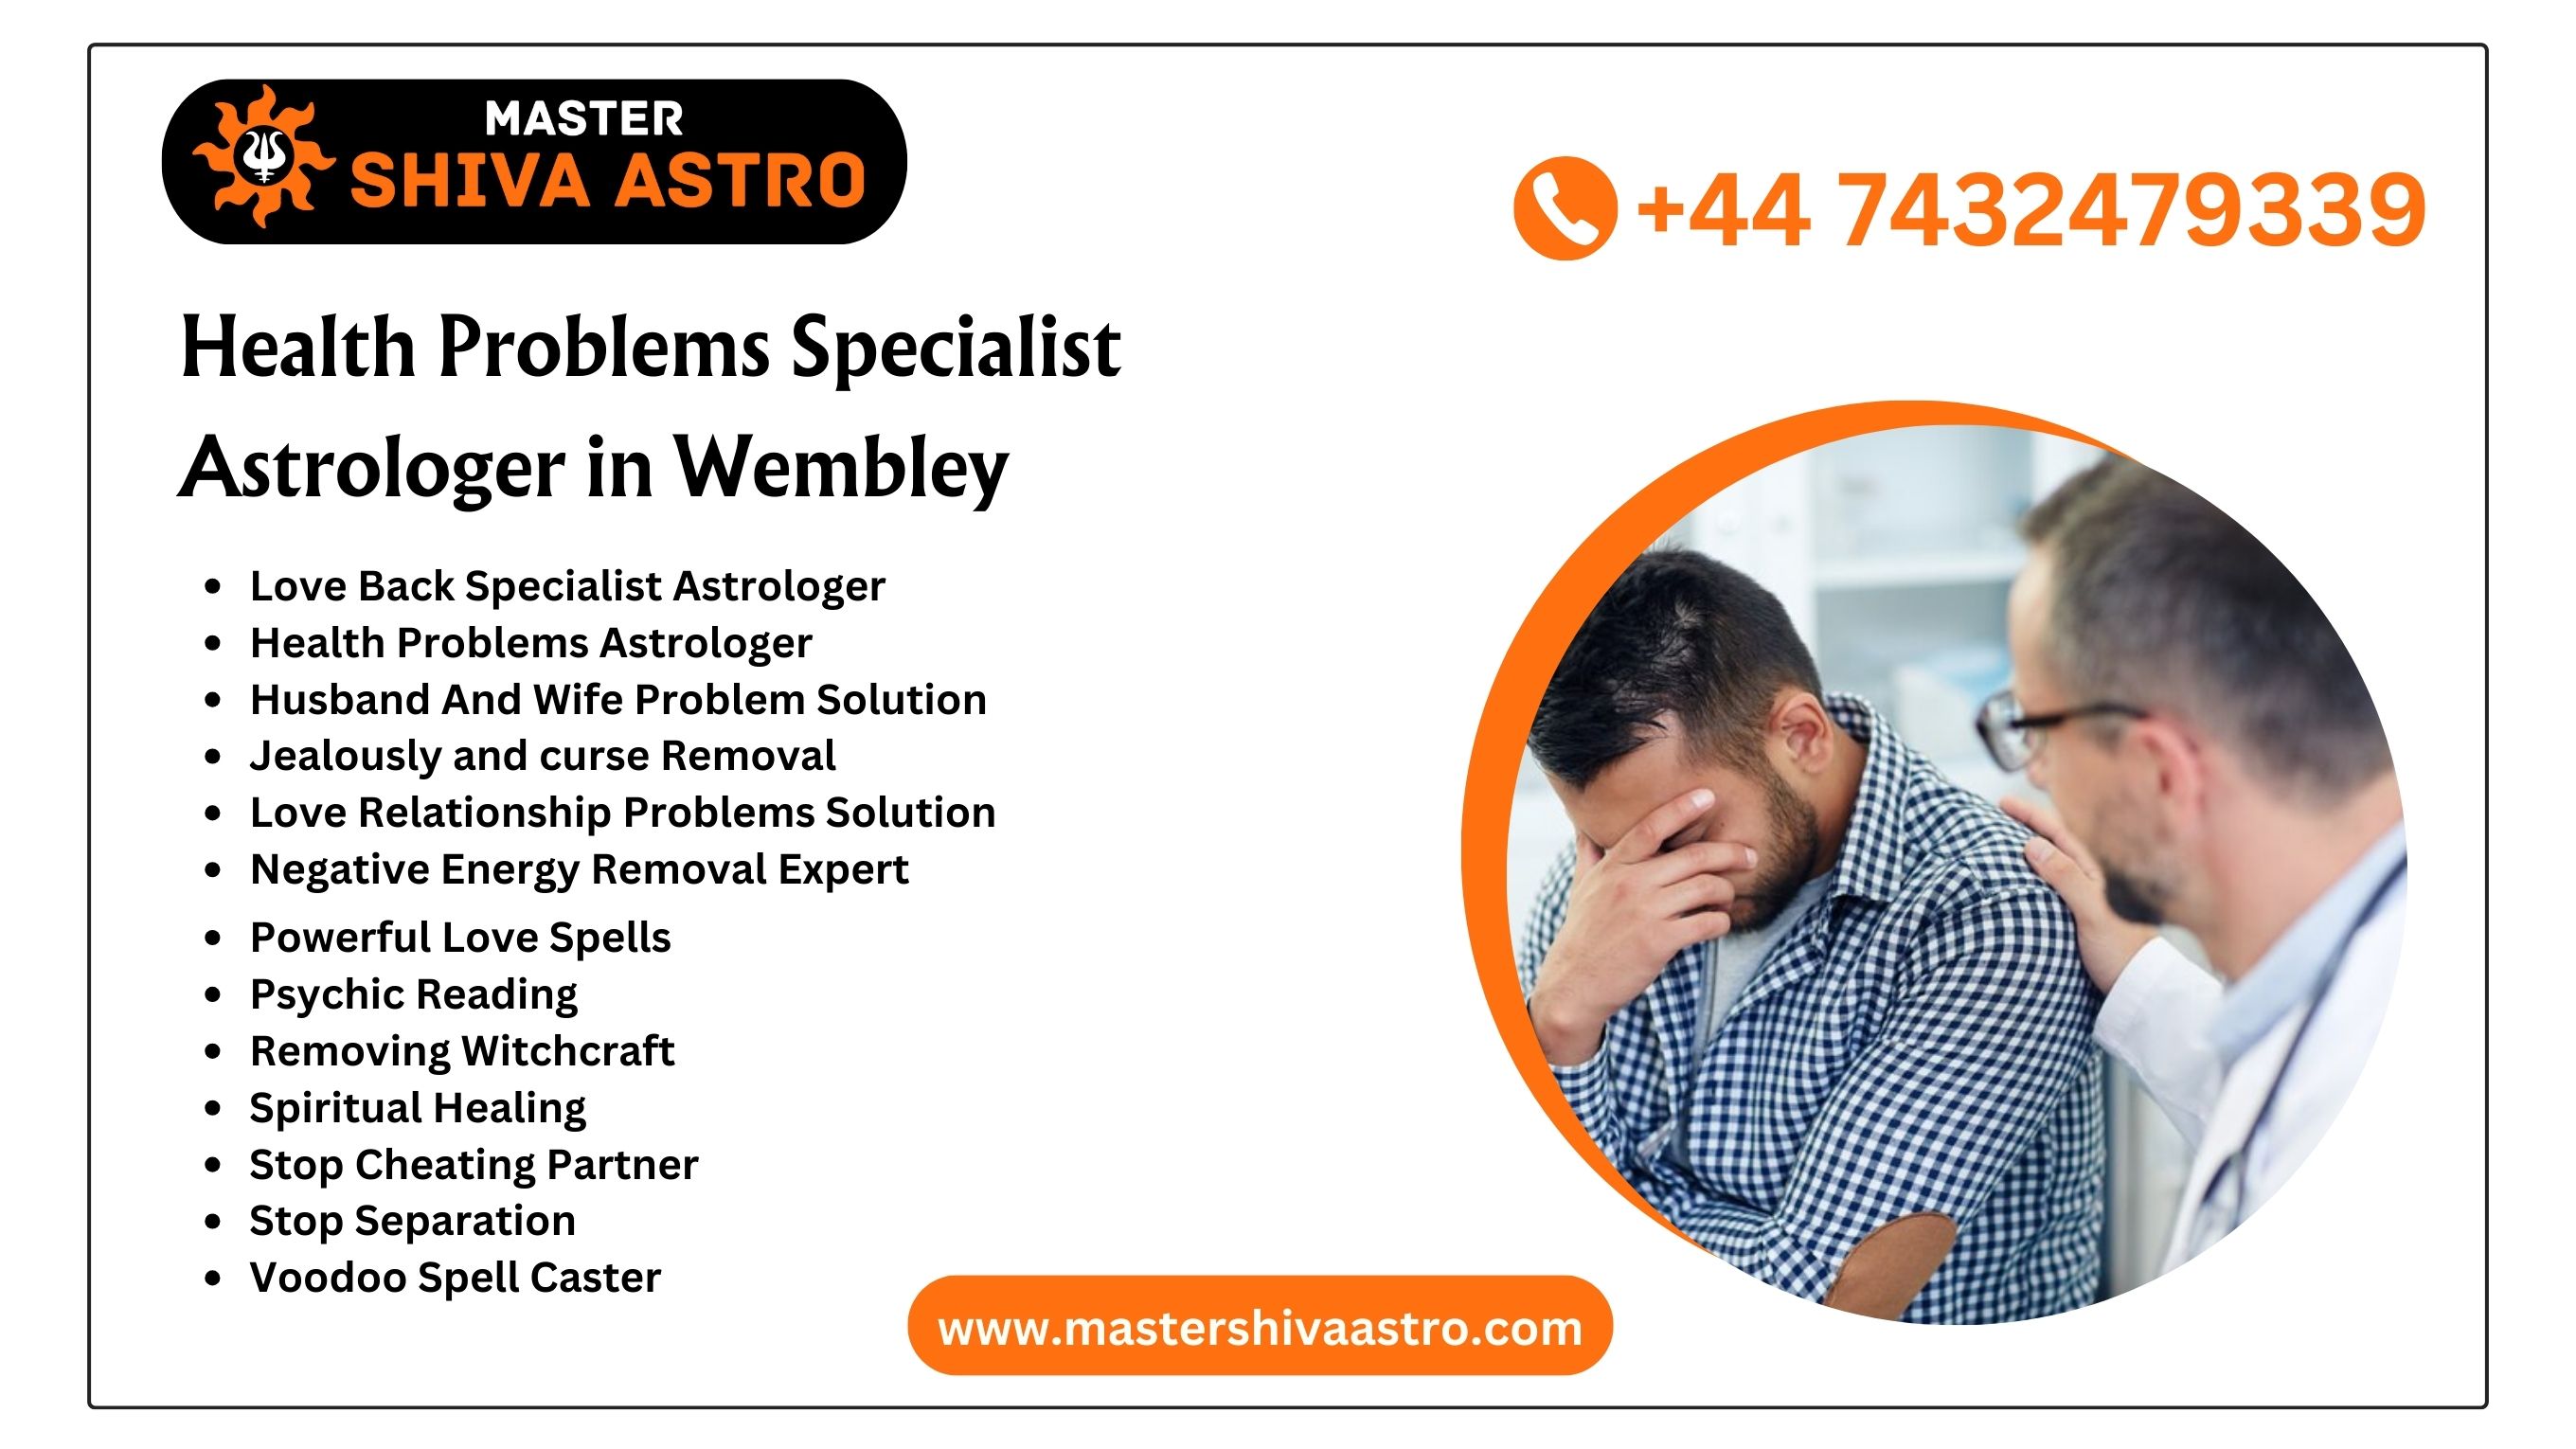 Health Problems Specialist Astrologer in Wembley - Master Shiva